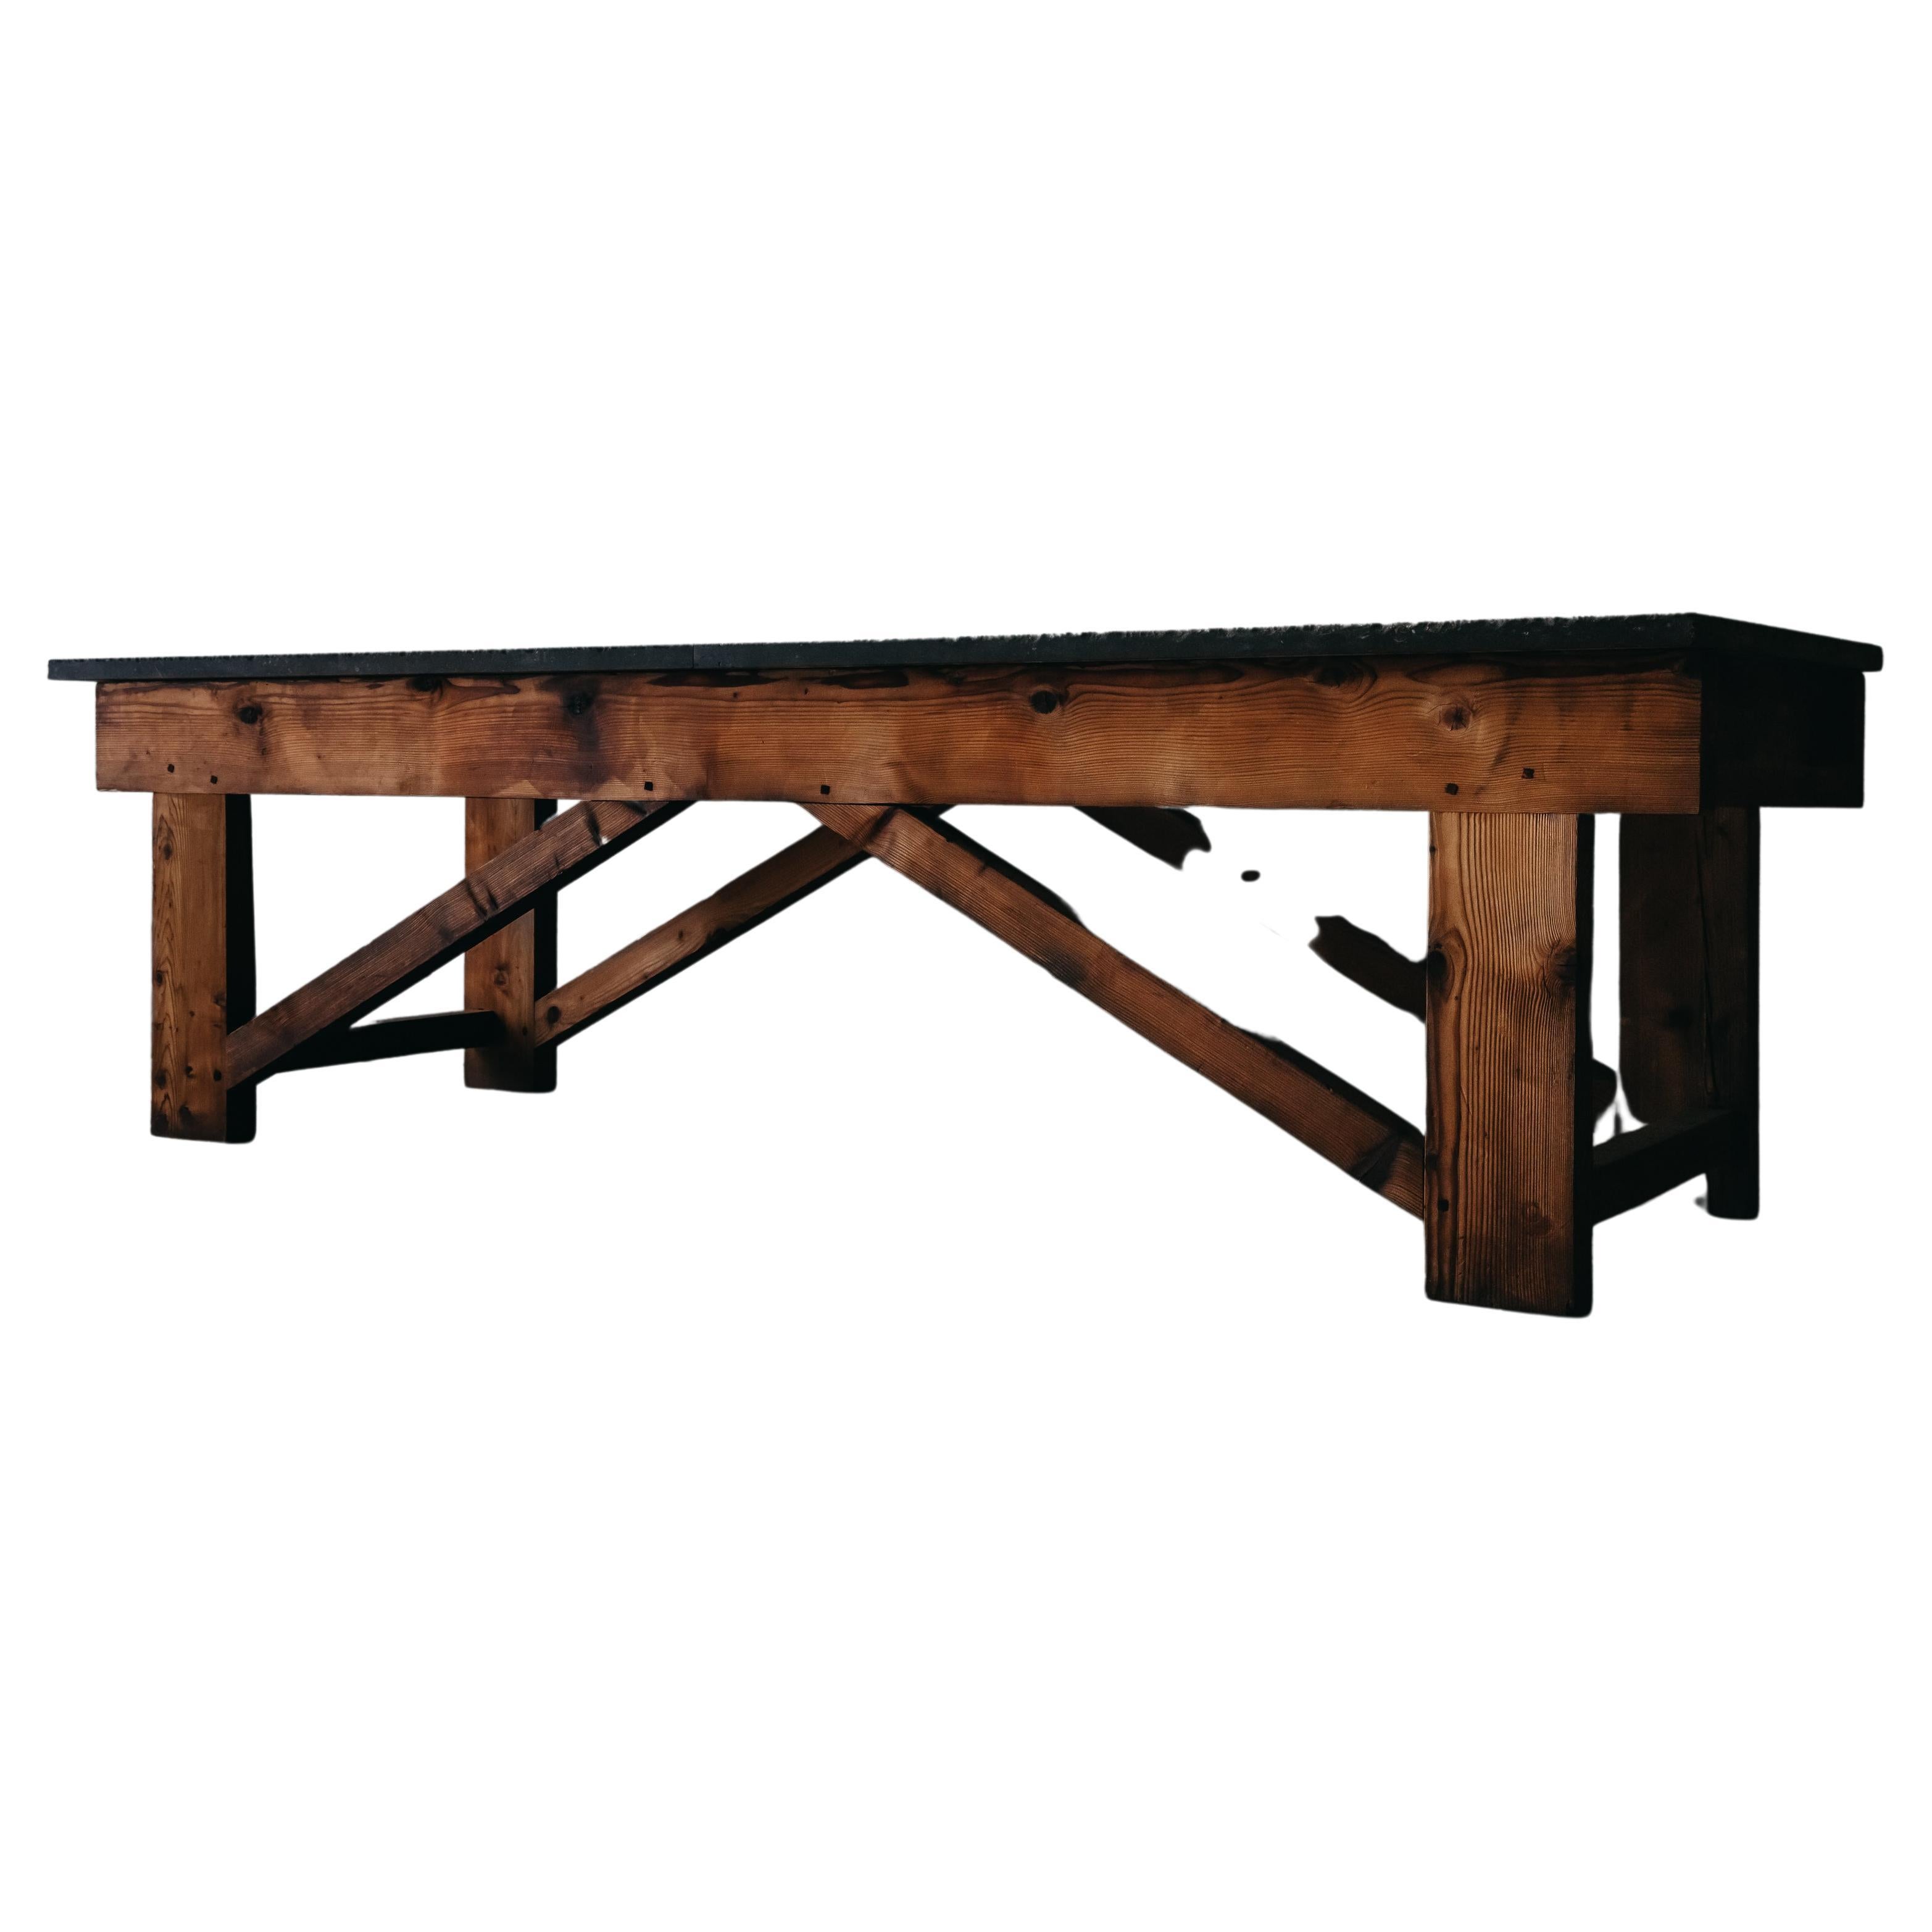 Vintage Xl Stone Console Table from France, circa 1940 For Sale